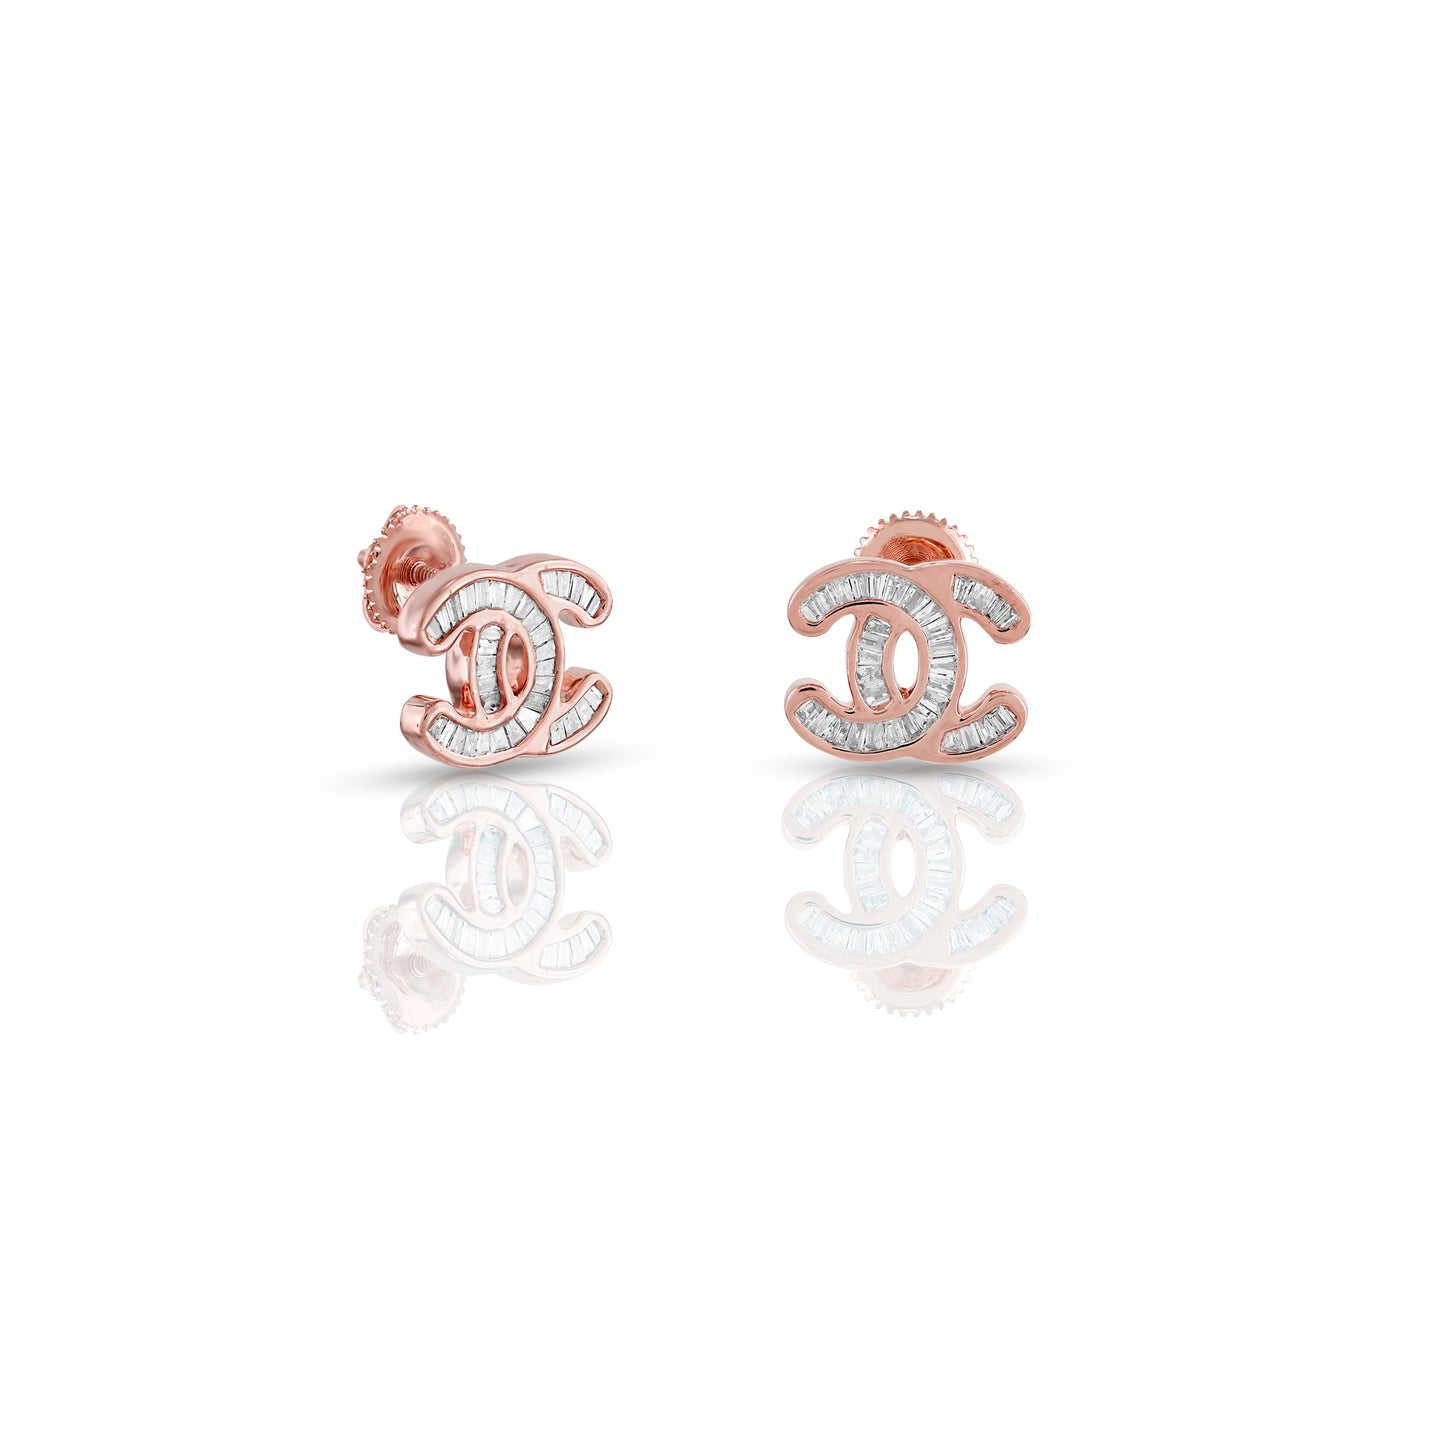 0.40ct Rose Gold Baguette Diamond Chanel CC Earrings by Truth Jewel